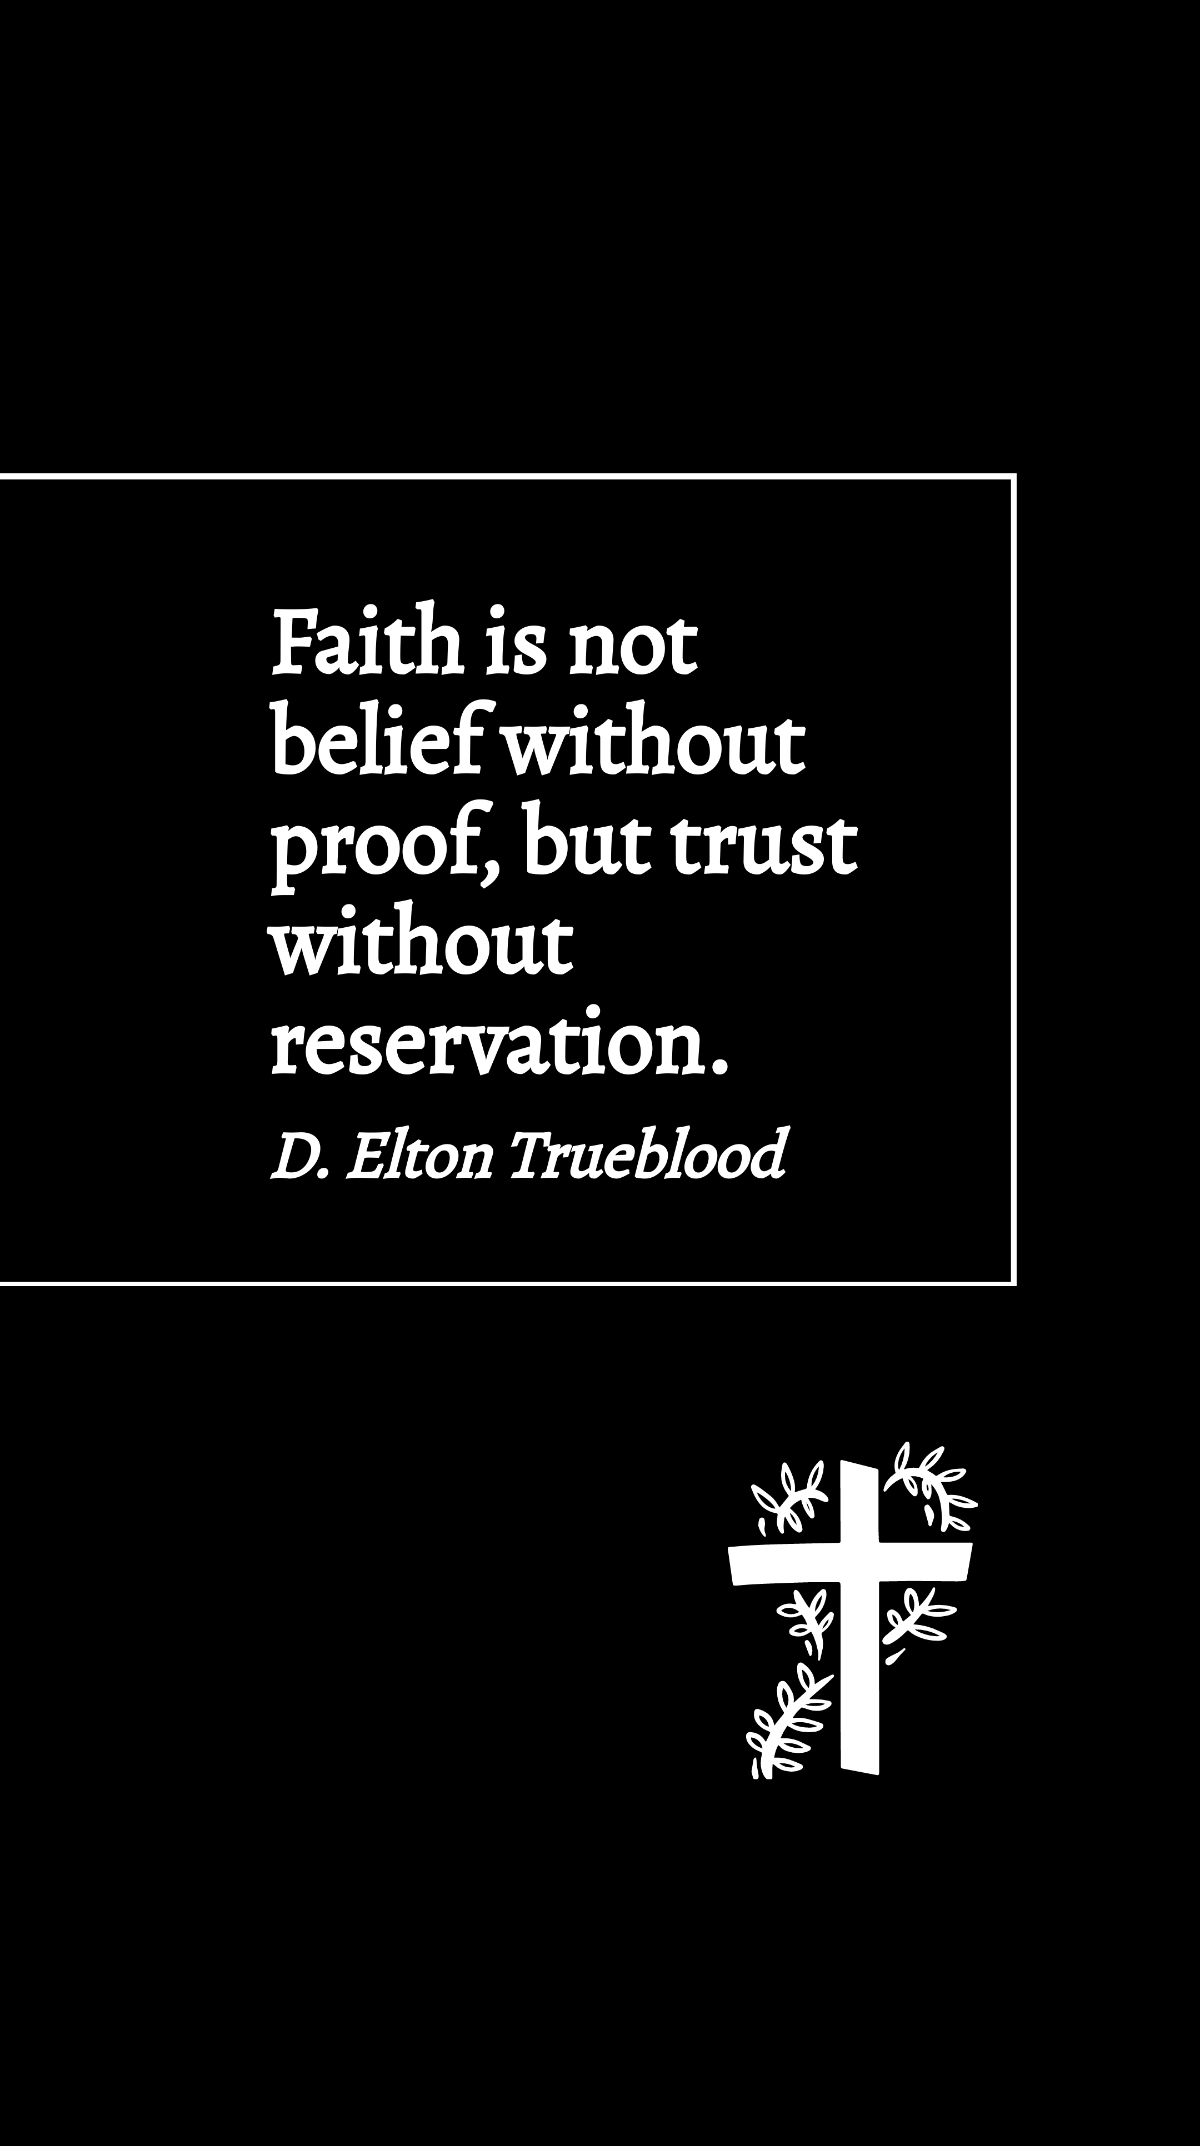 D. Elton Trueblood - Faith is not belief without proof, but trust without reservation.